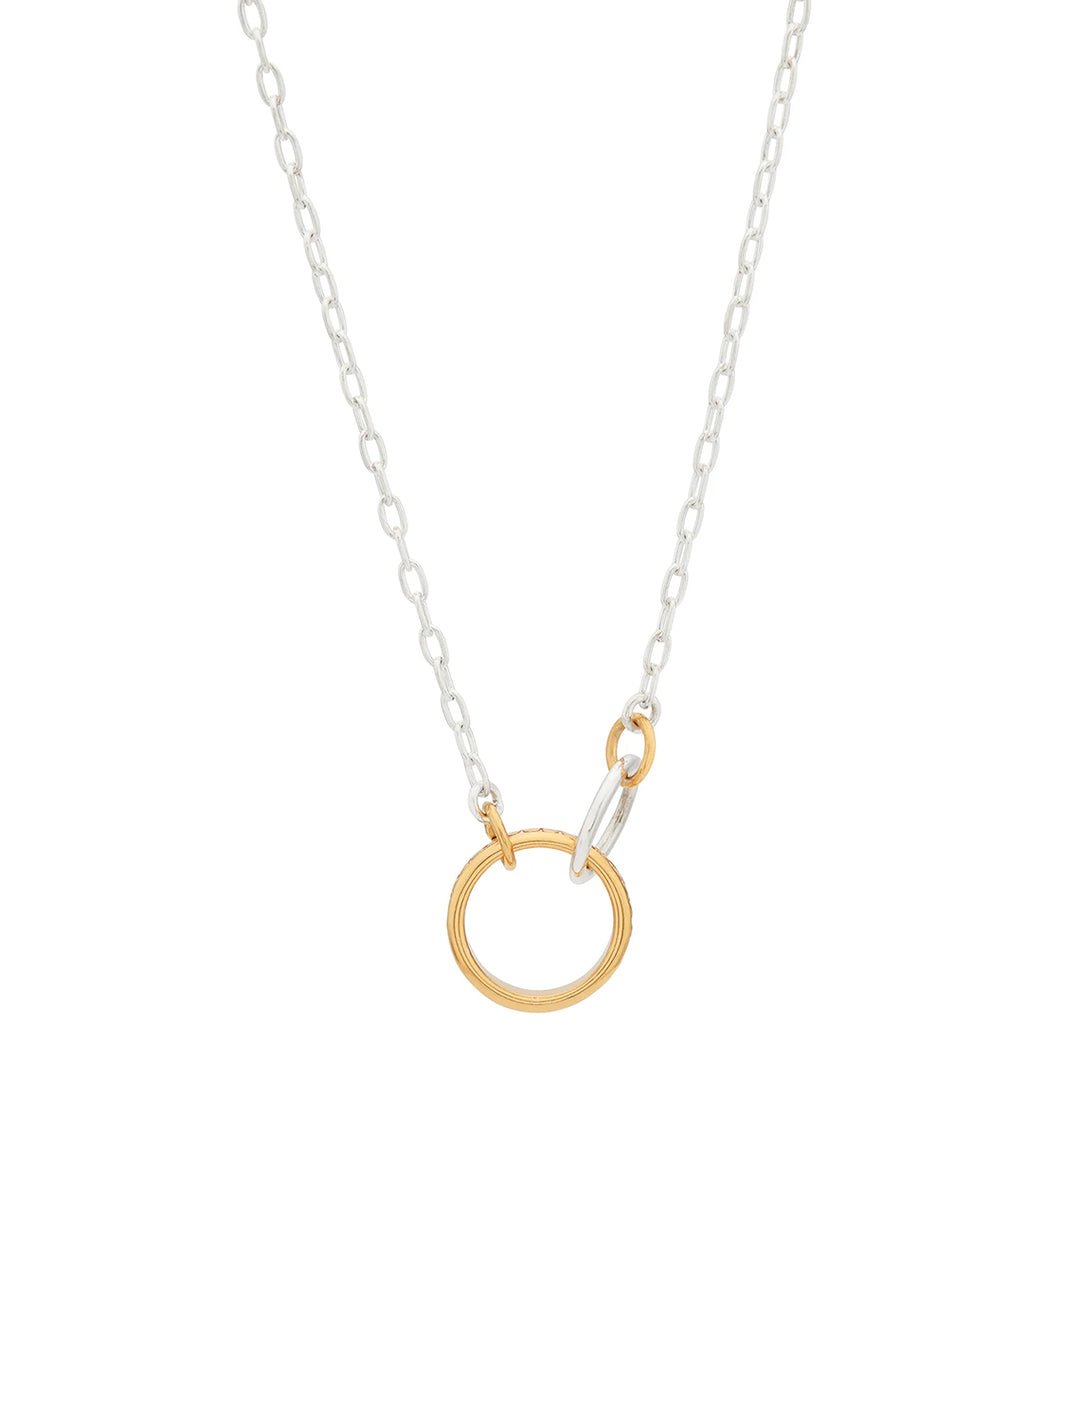 intertwined circles charity necklace in two tone